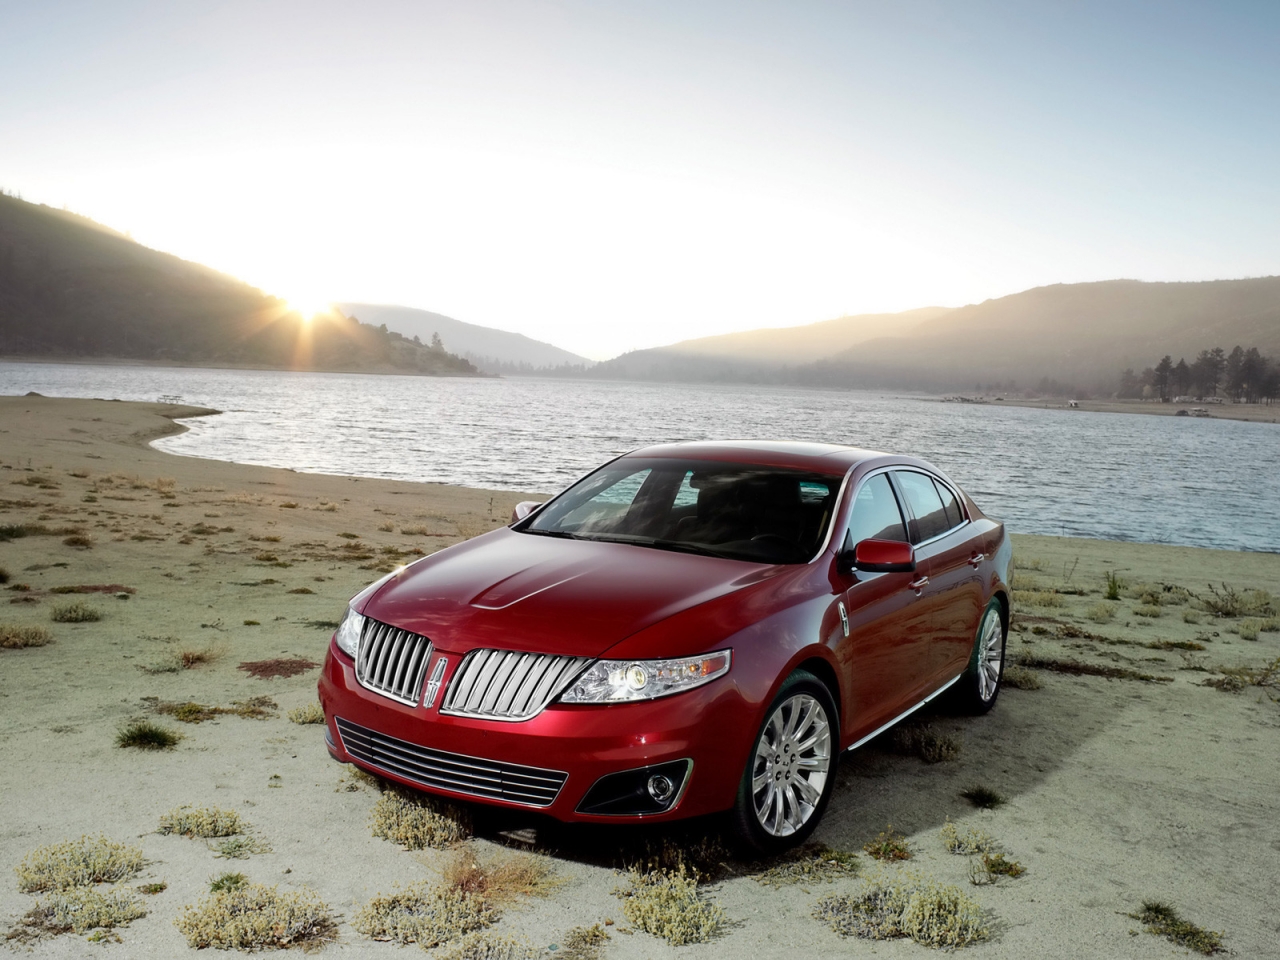 Lincoln Mark MKS 2009 for 1280 x 960 resolution